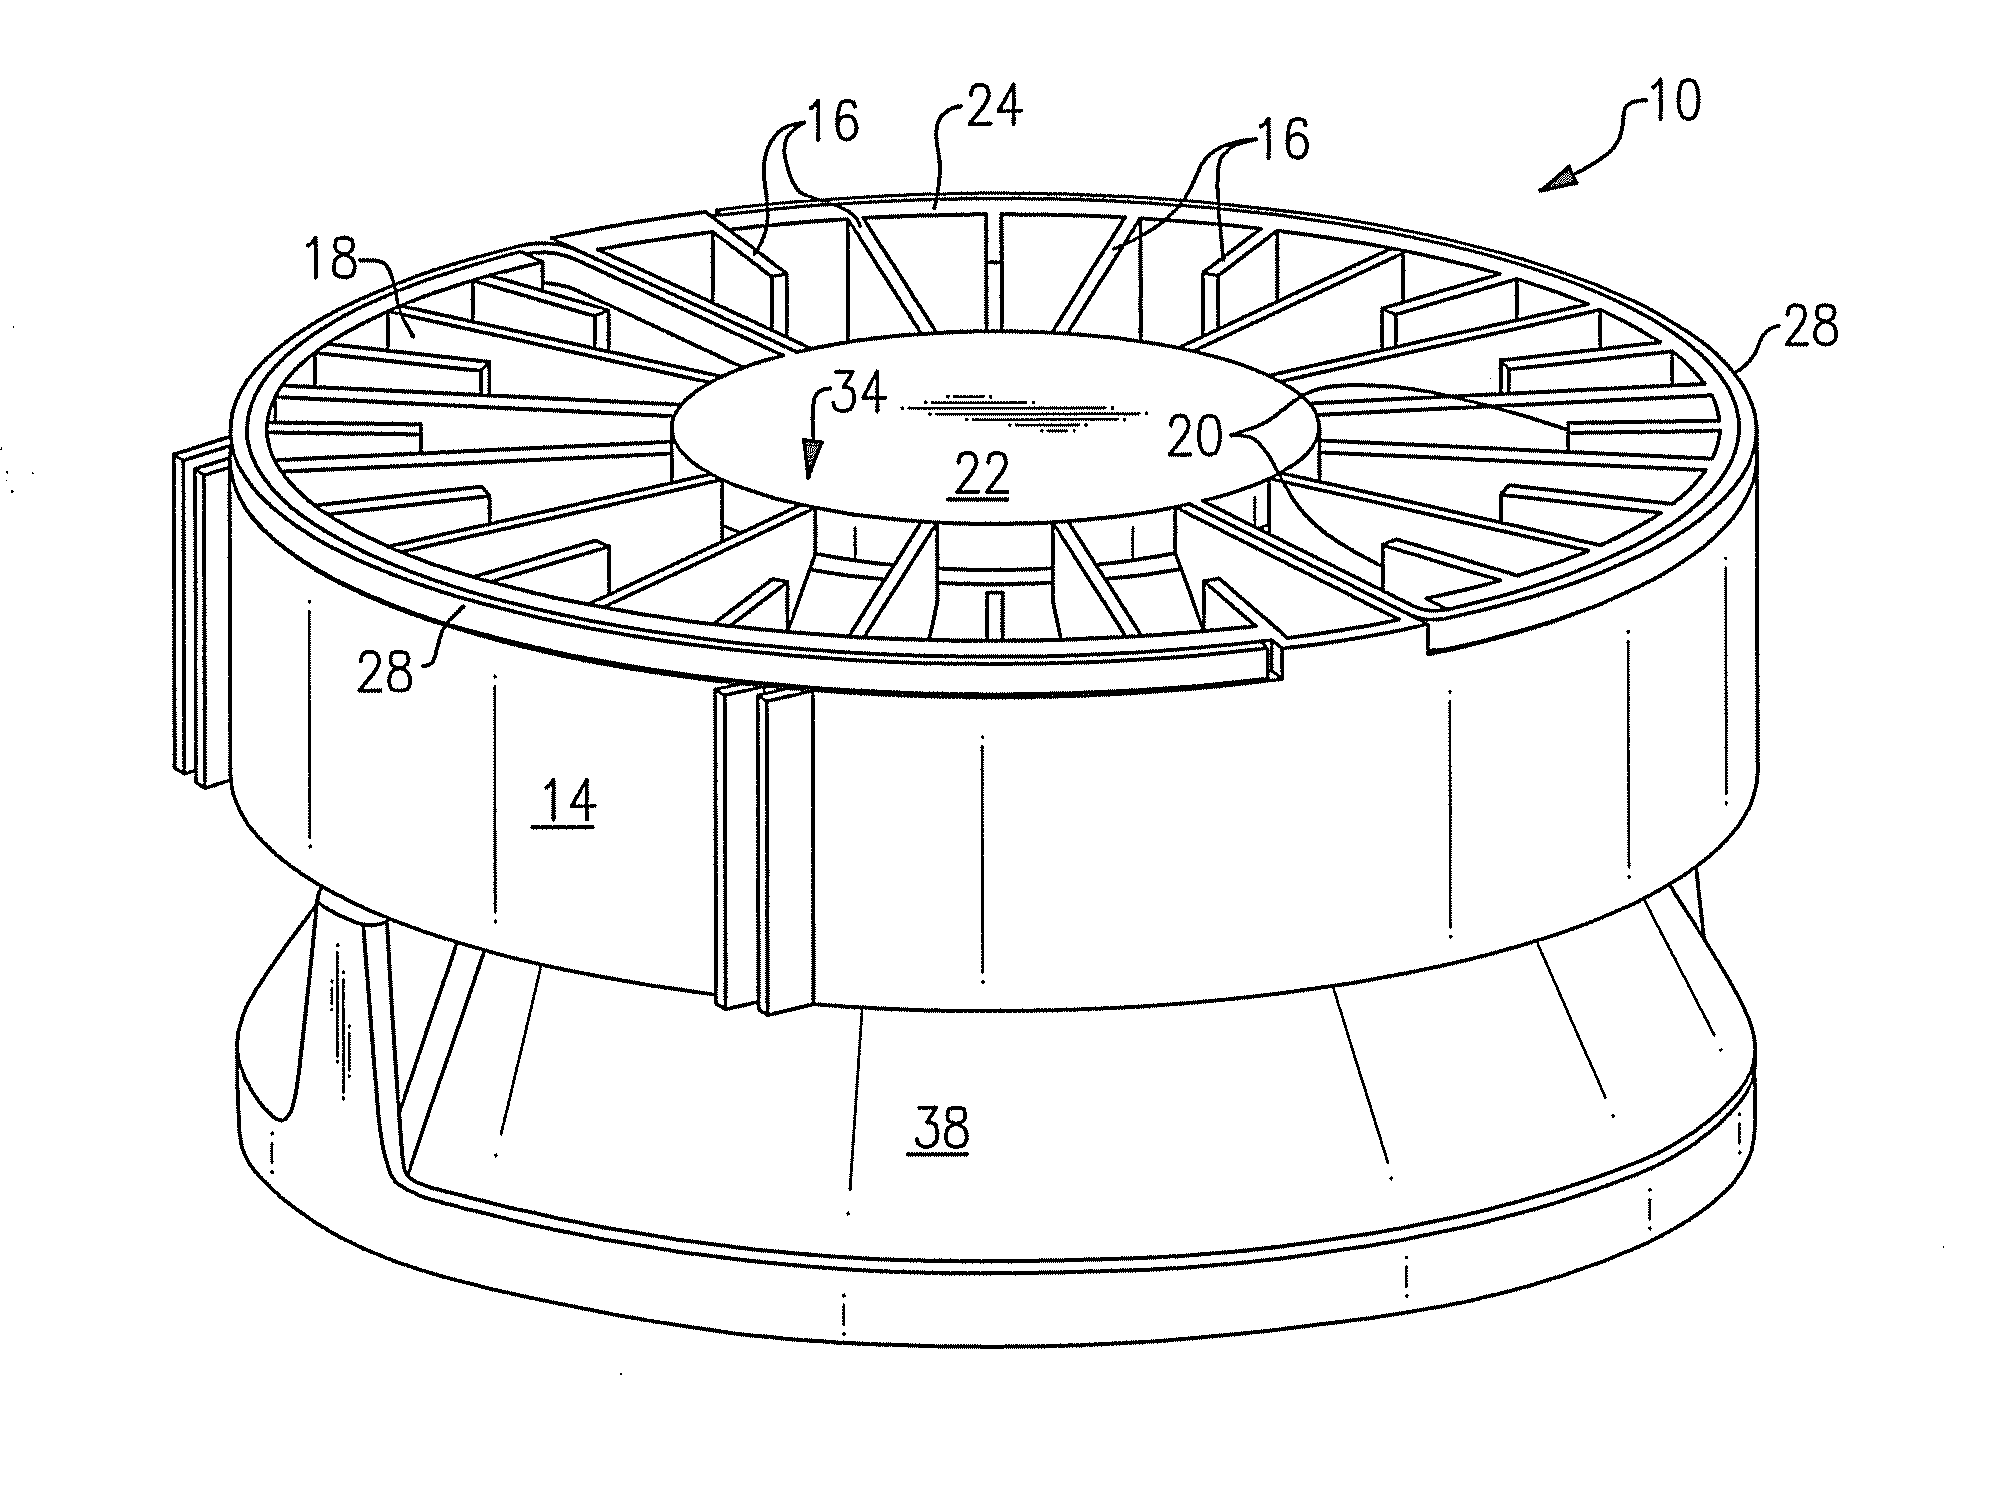 Lighting device with heat dissipation elements